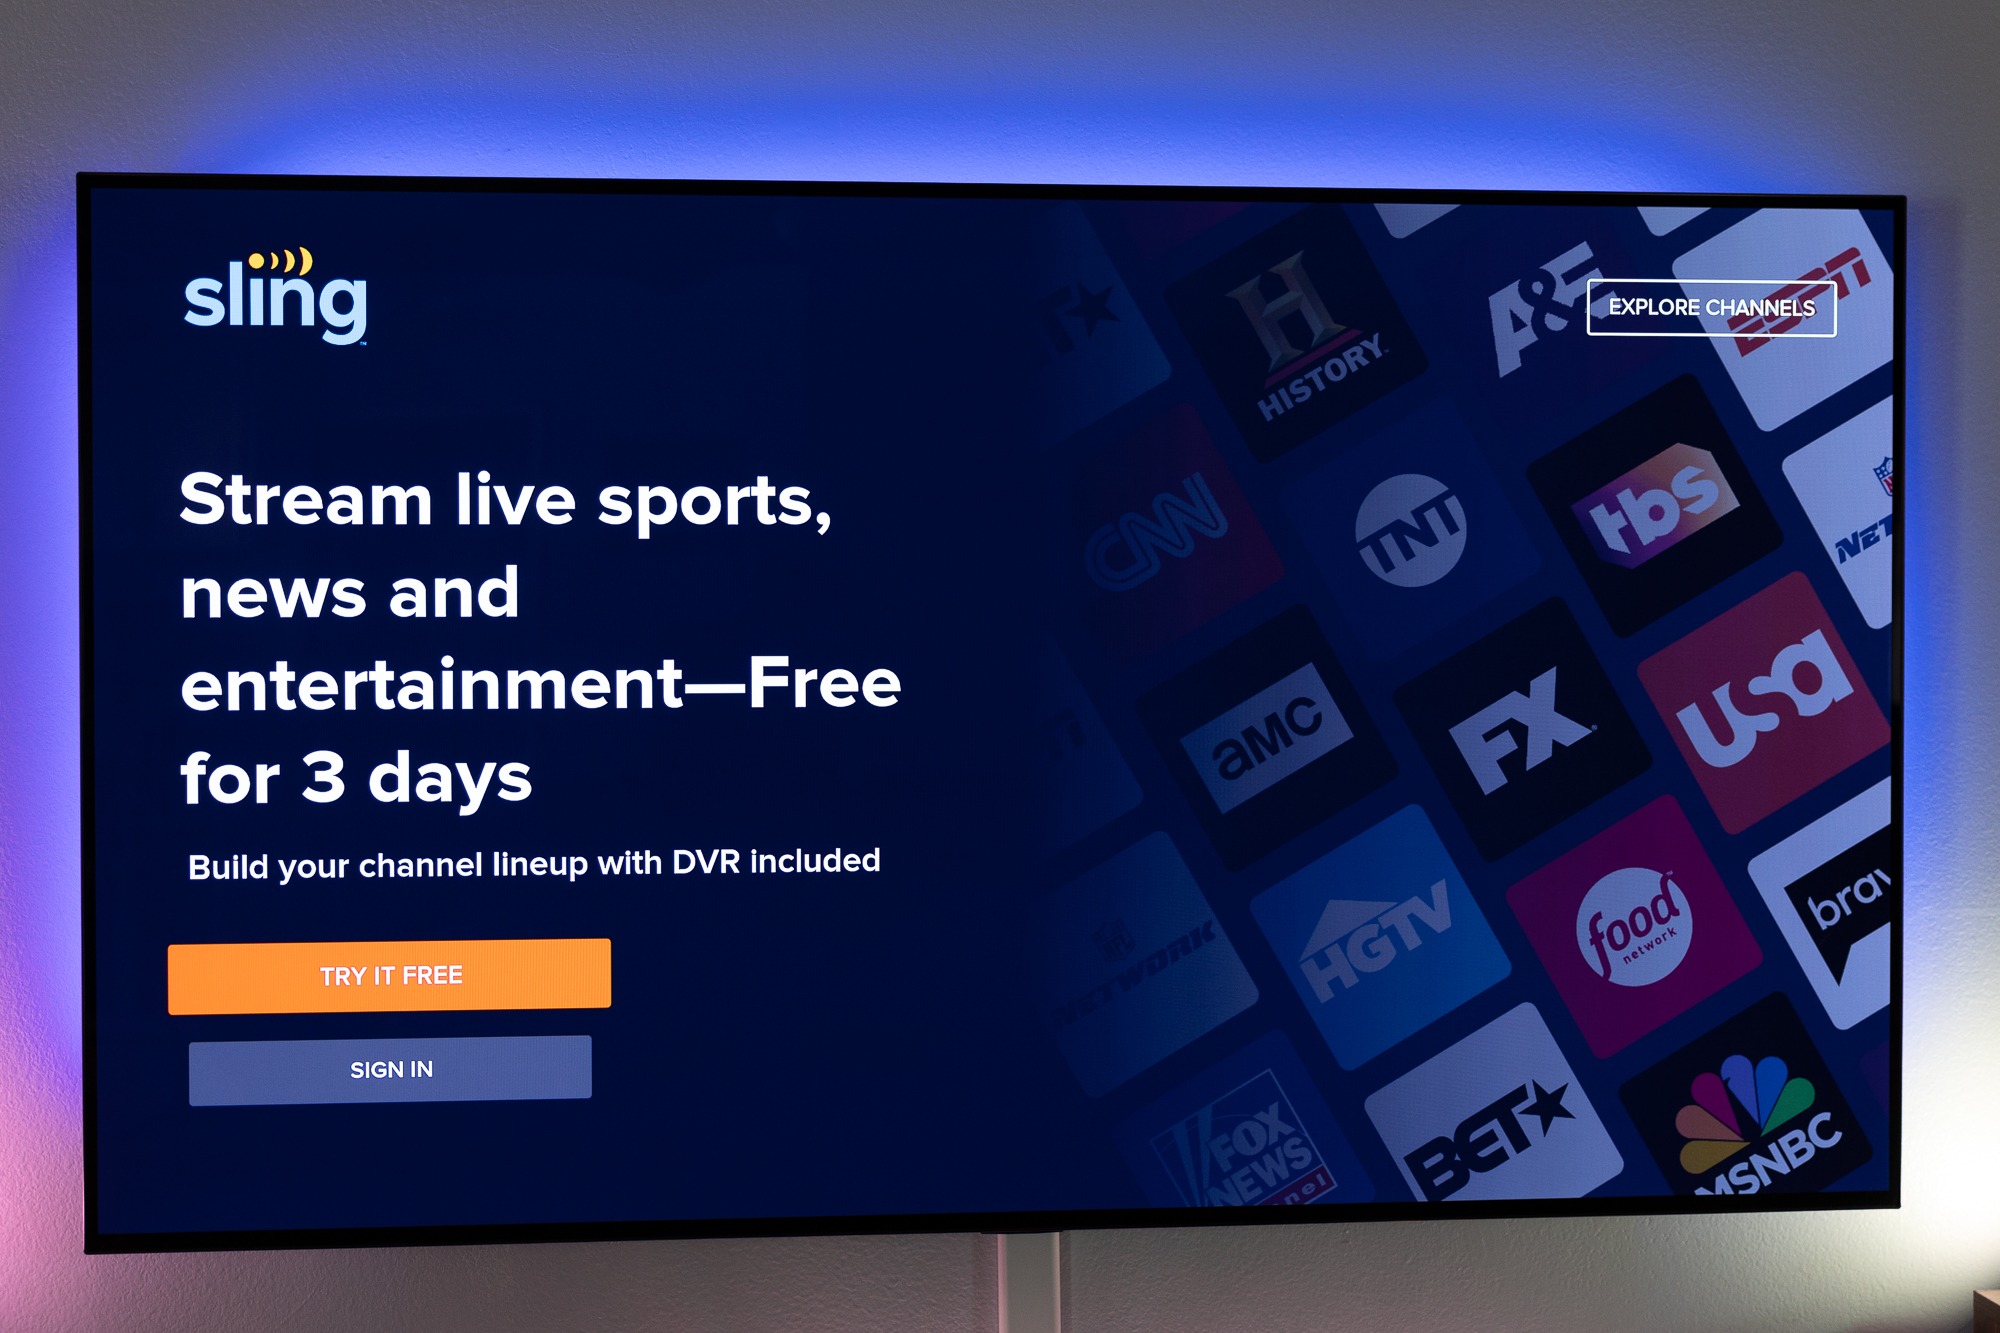 sling packages with cbs sports